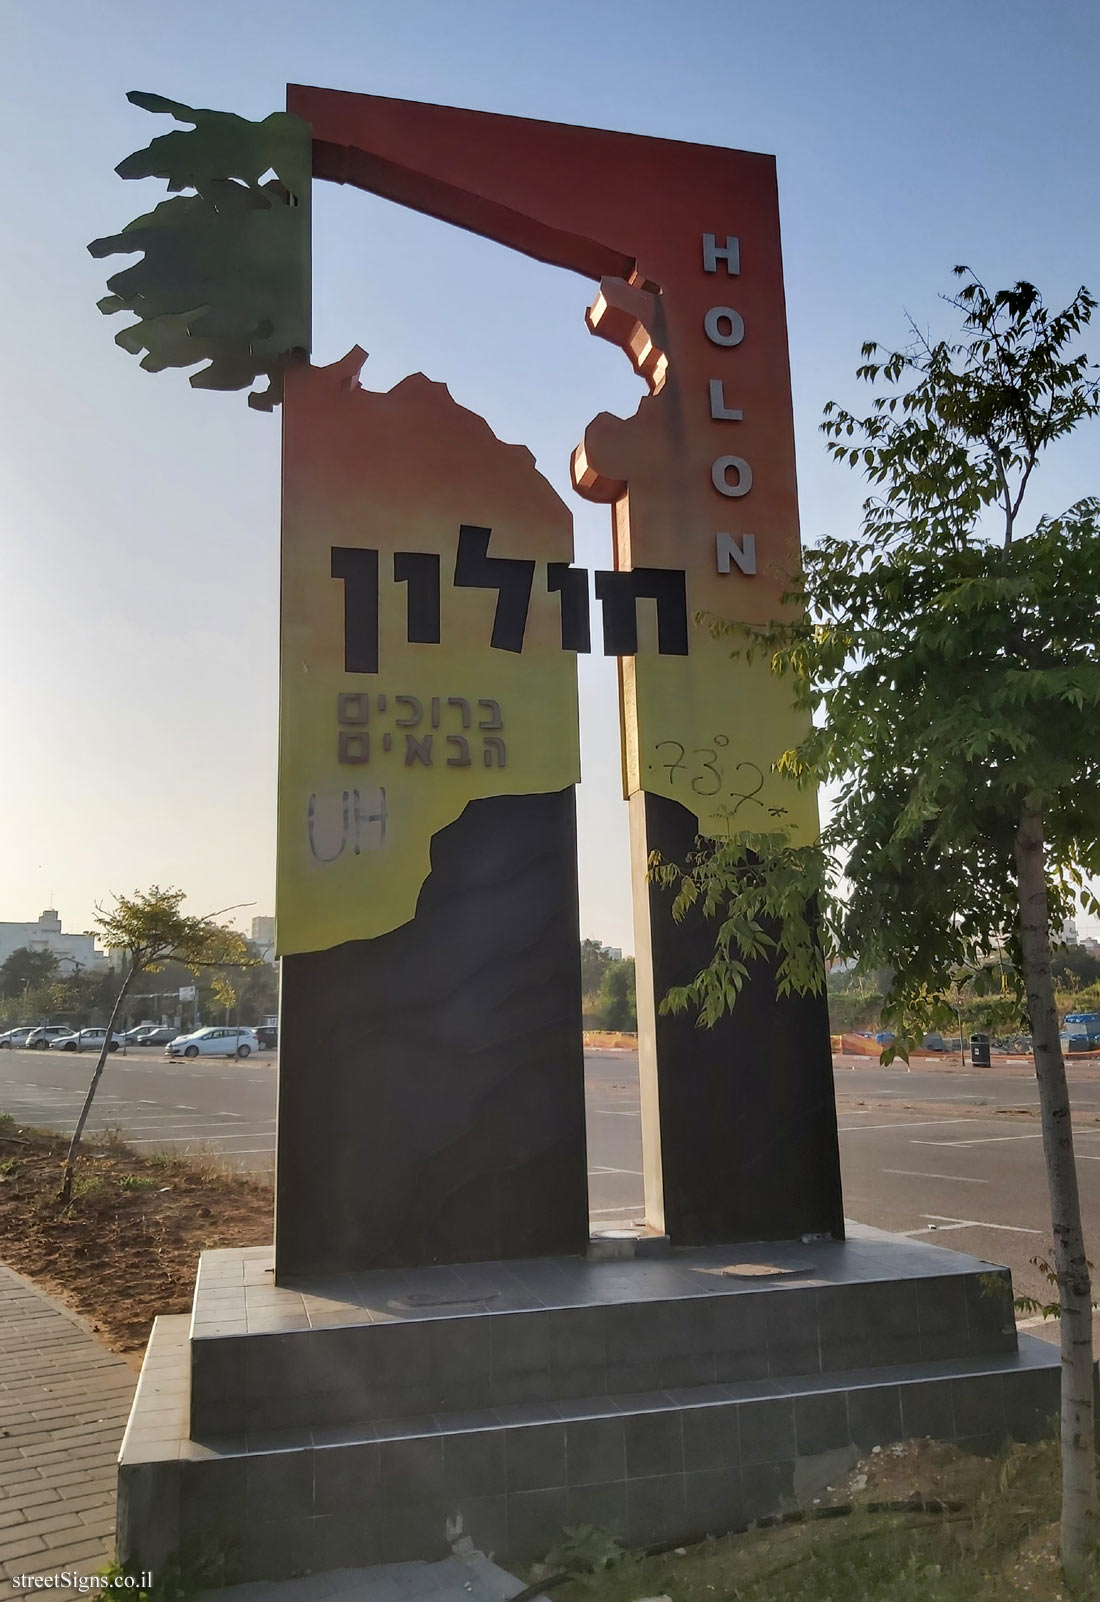 Holon - the entrance sign to the city - HaYovel Gas Station/Moshe Dayan, Holon, Israel